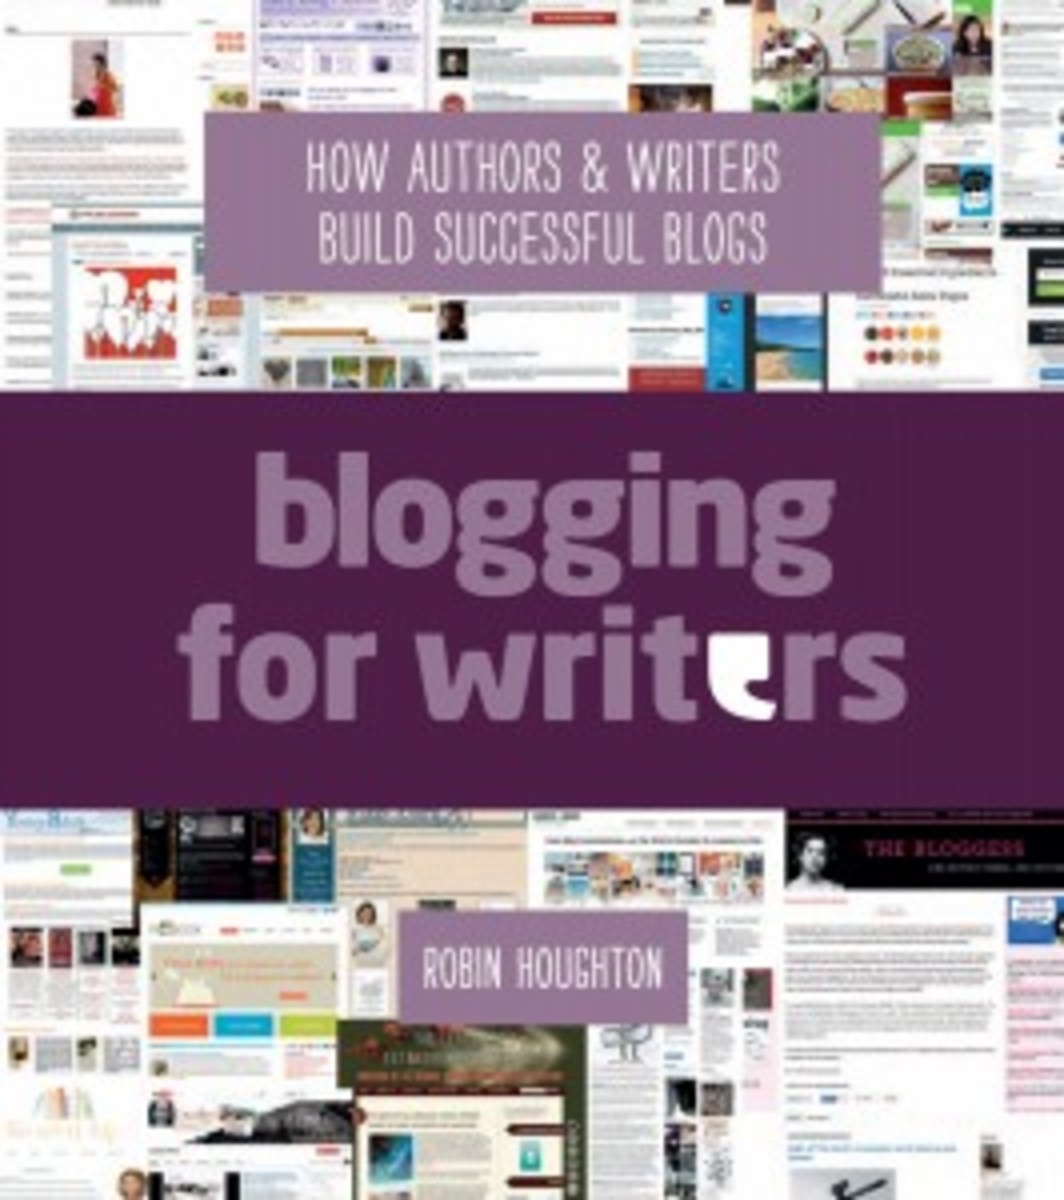 Blogging for Writers by Robin Houghton